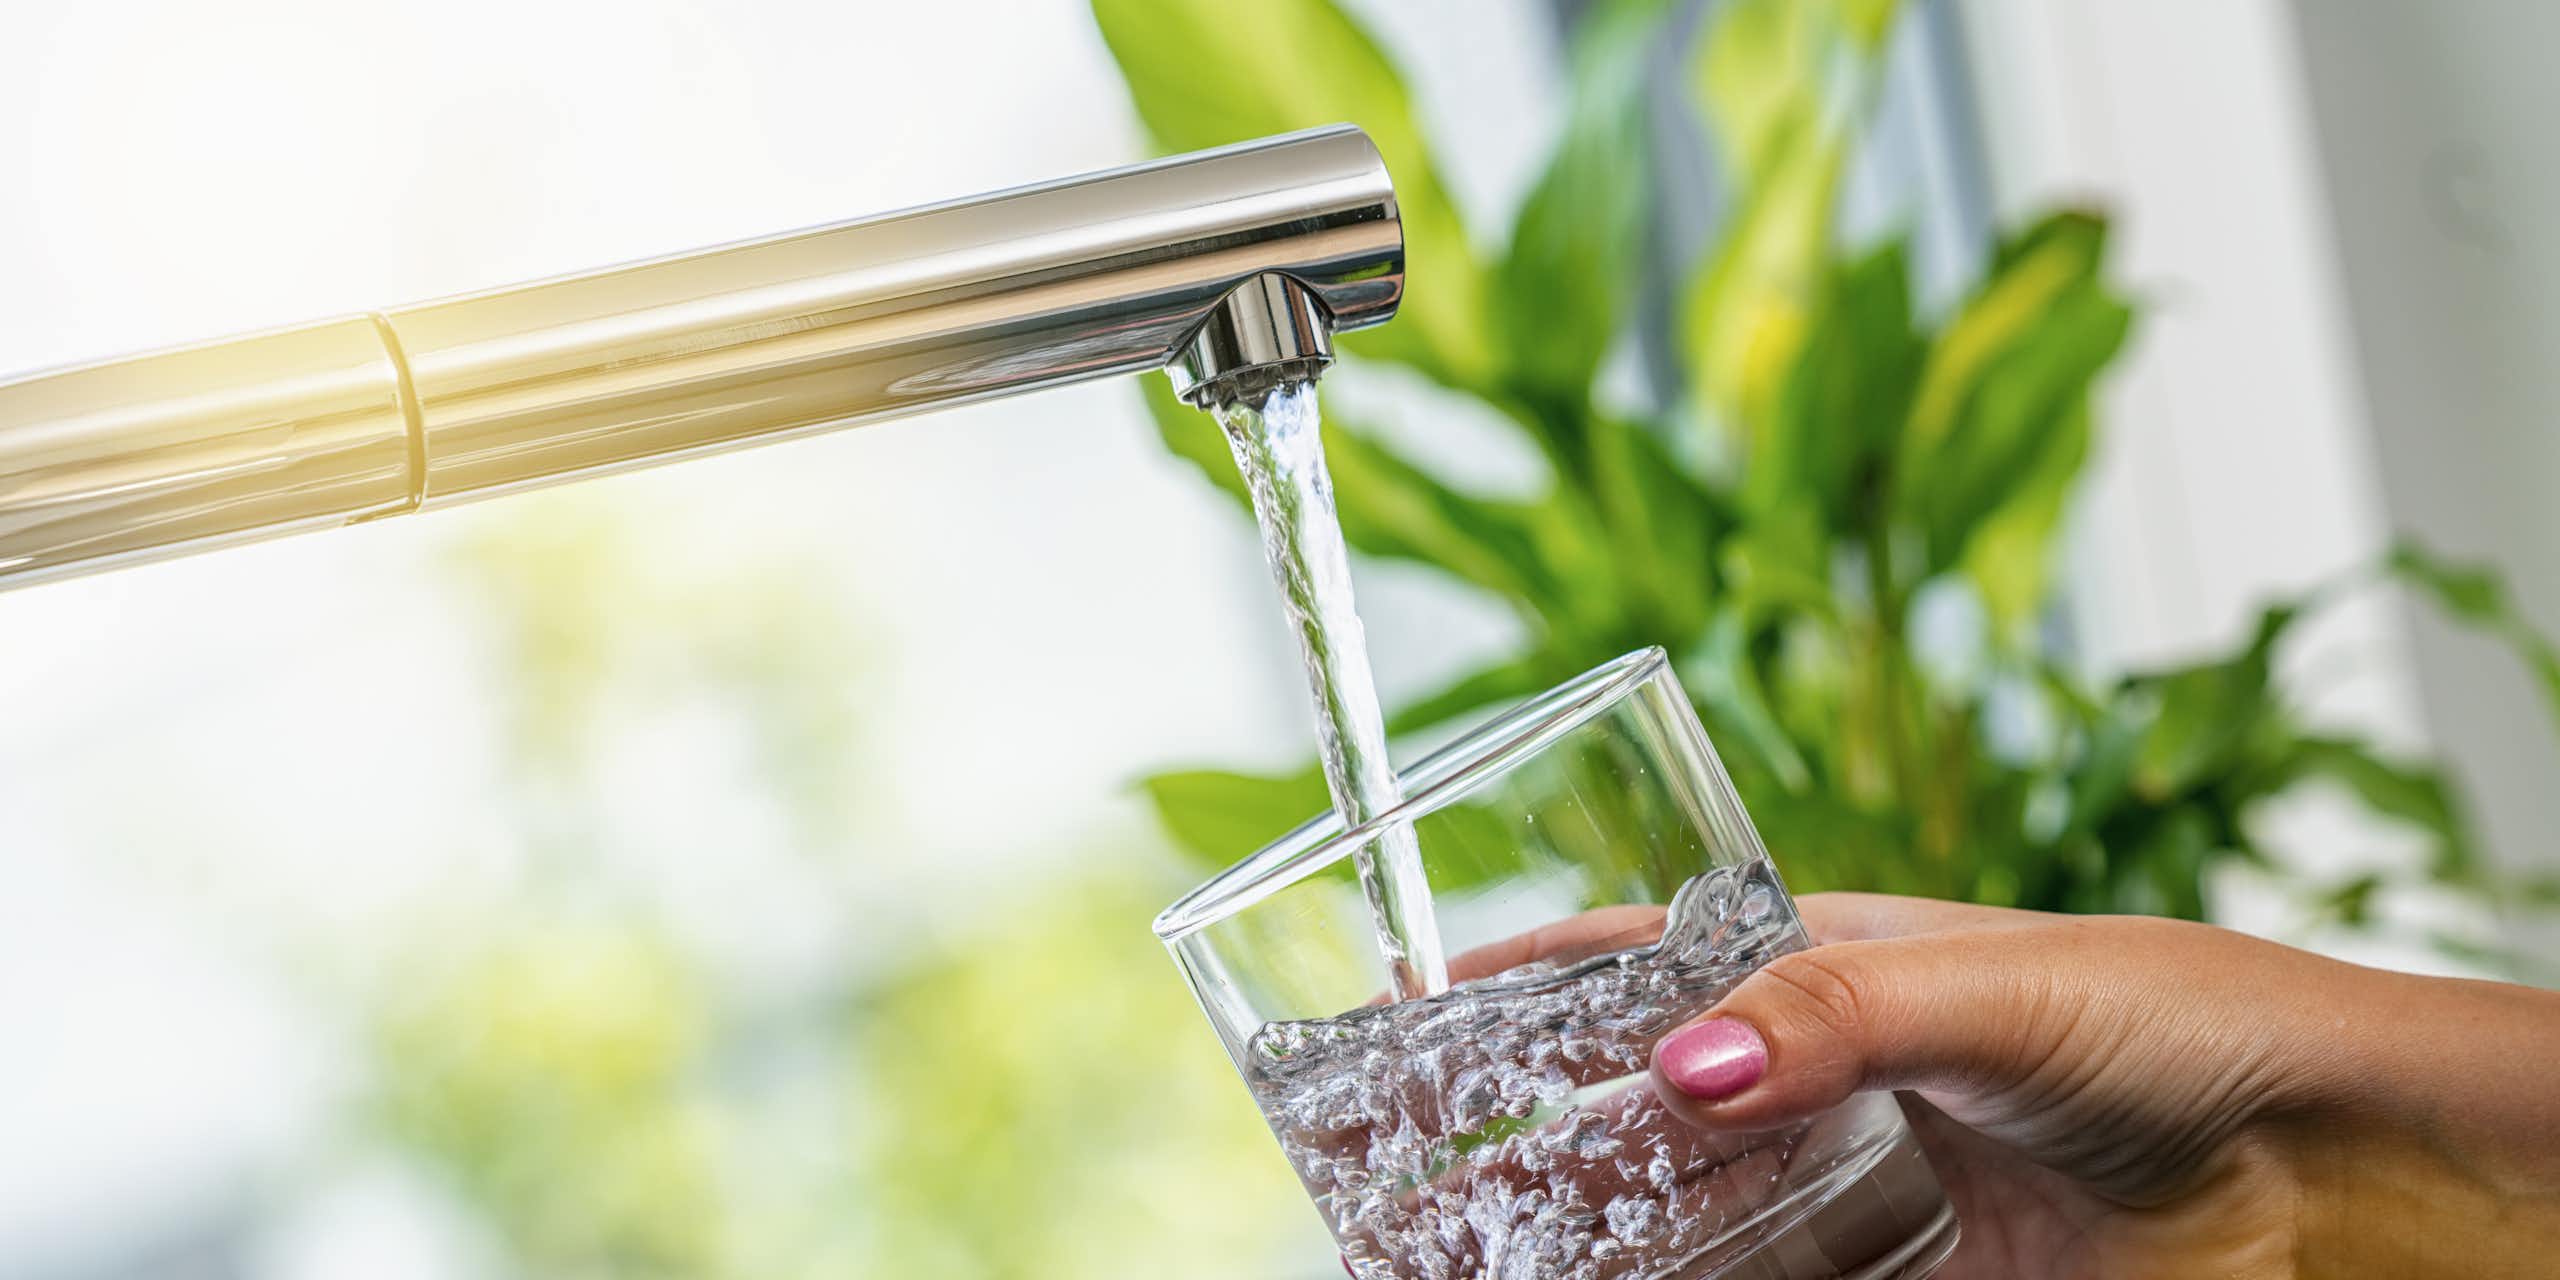 A woman's hand holds a glass of water being filled from a tap